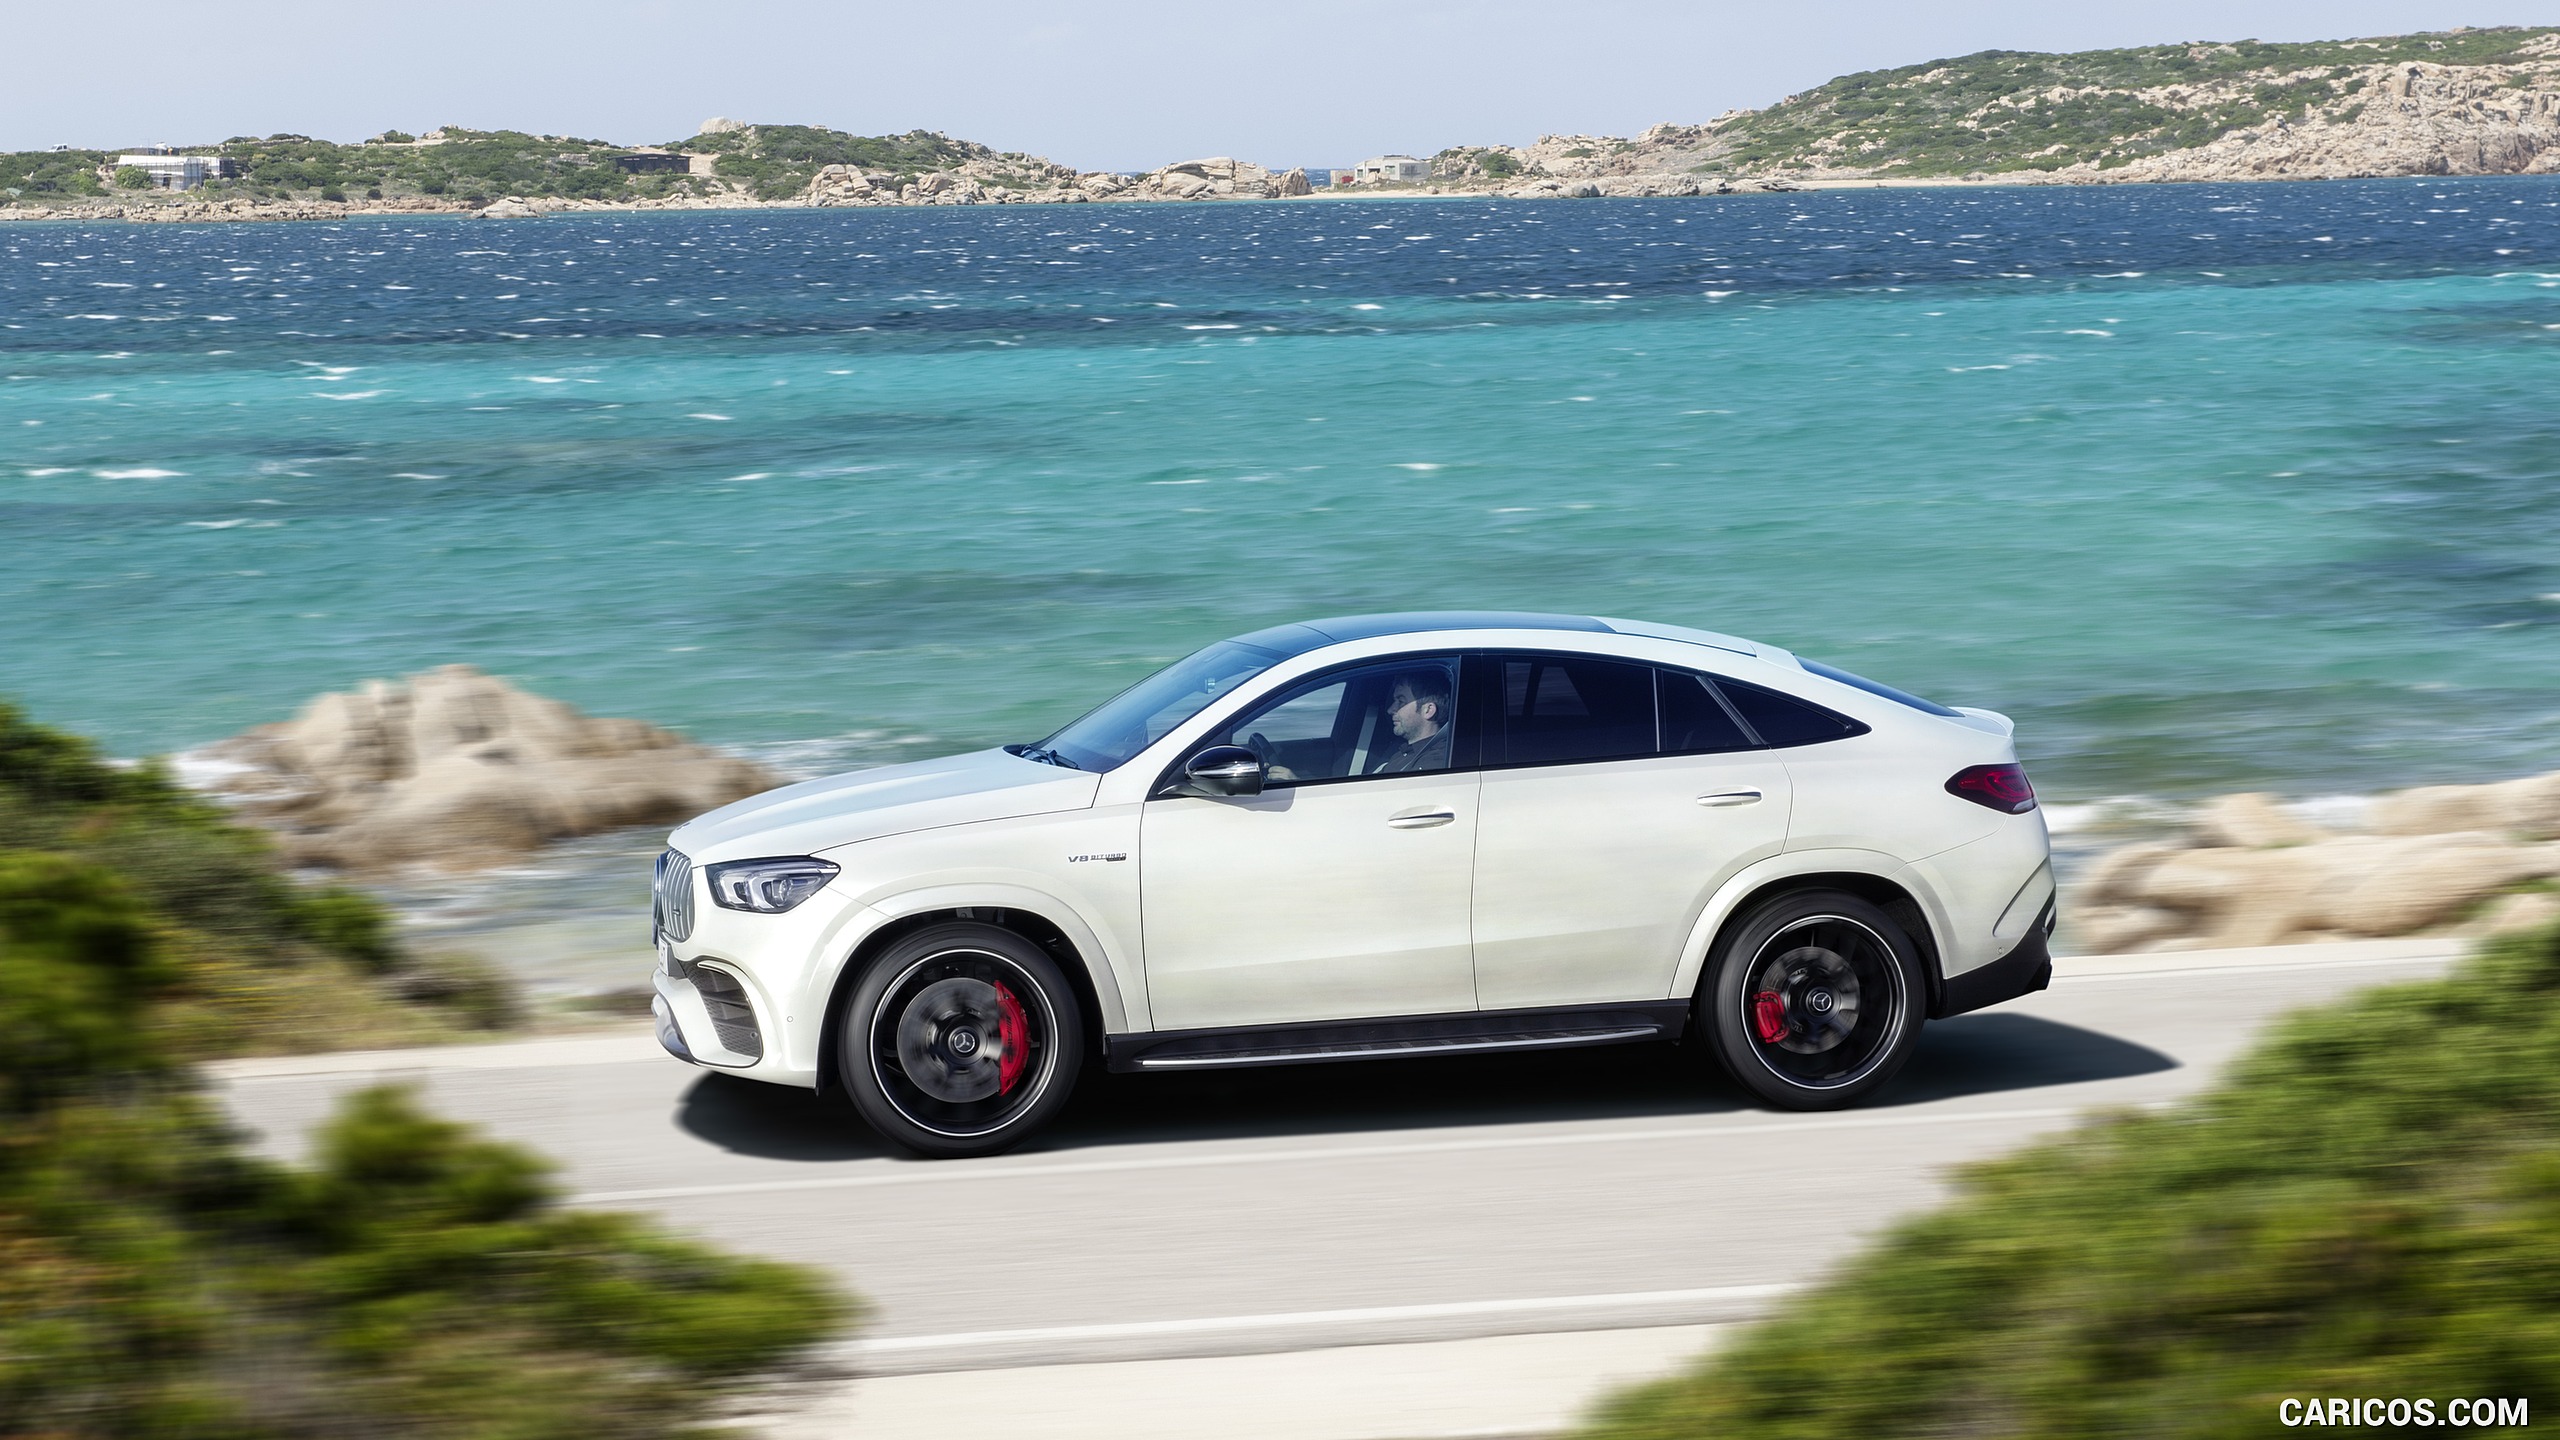 2021 Mercedes-AMG GLE 63 S 4MATIC+ Coupe (Color: Diamond White), #2 of 66